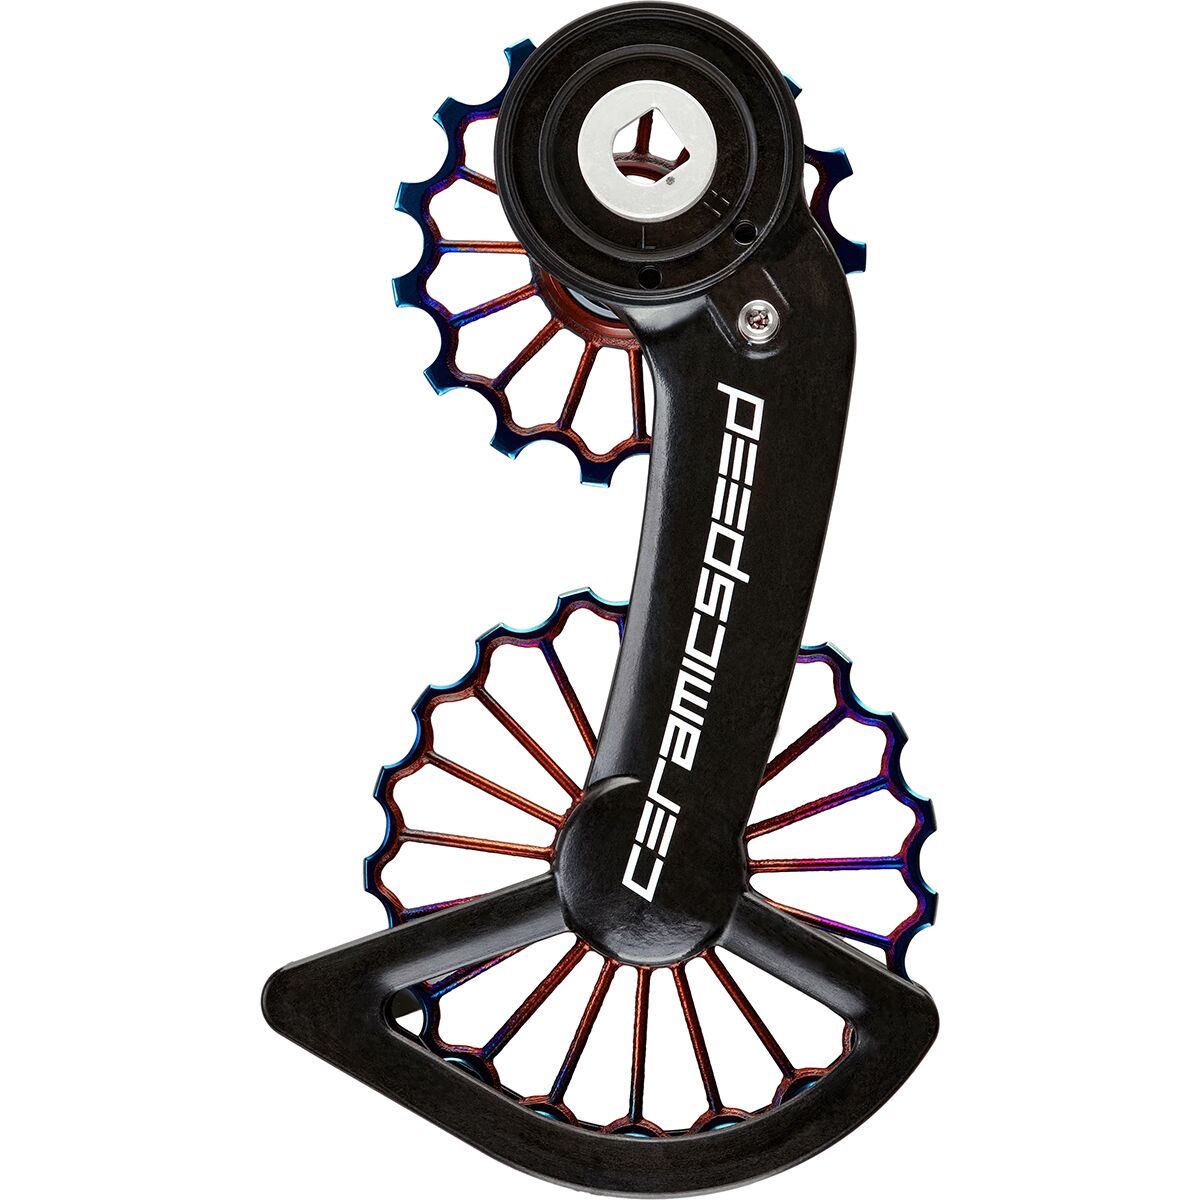 CeramicSpeed OSPW 3D Hollow Ti Oil Slick PVD Ctd Red/Force Axs, one size